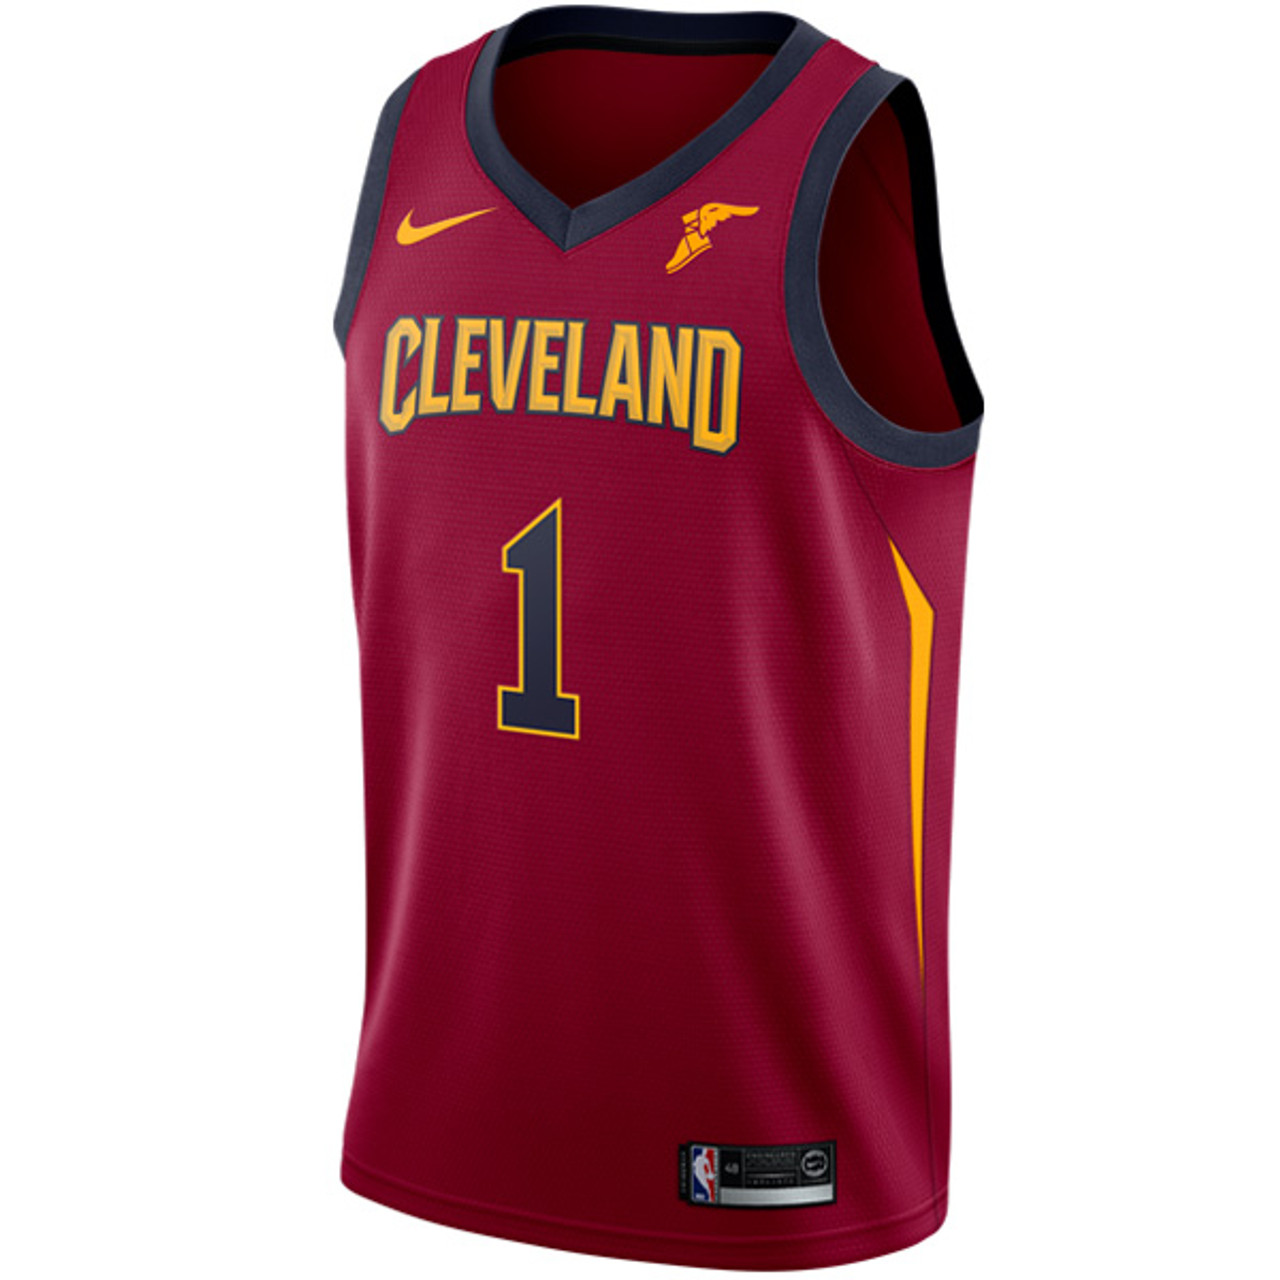 cleveland cavaliers jersey number 1